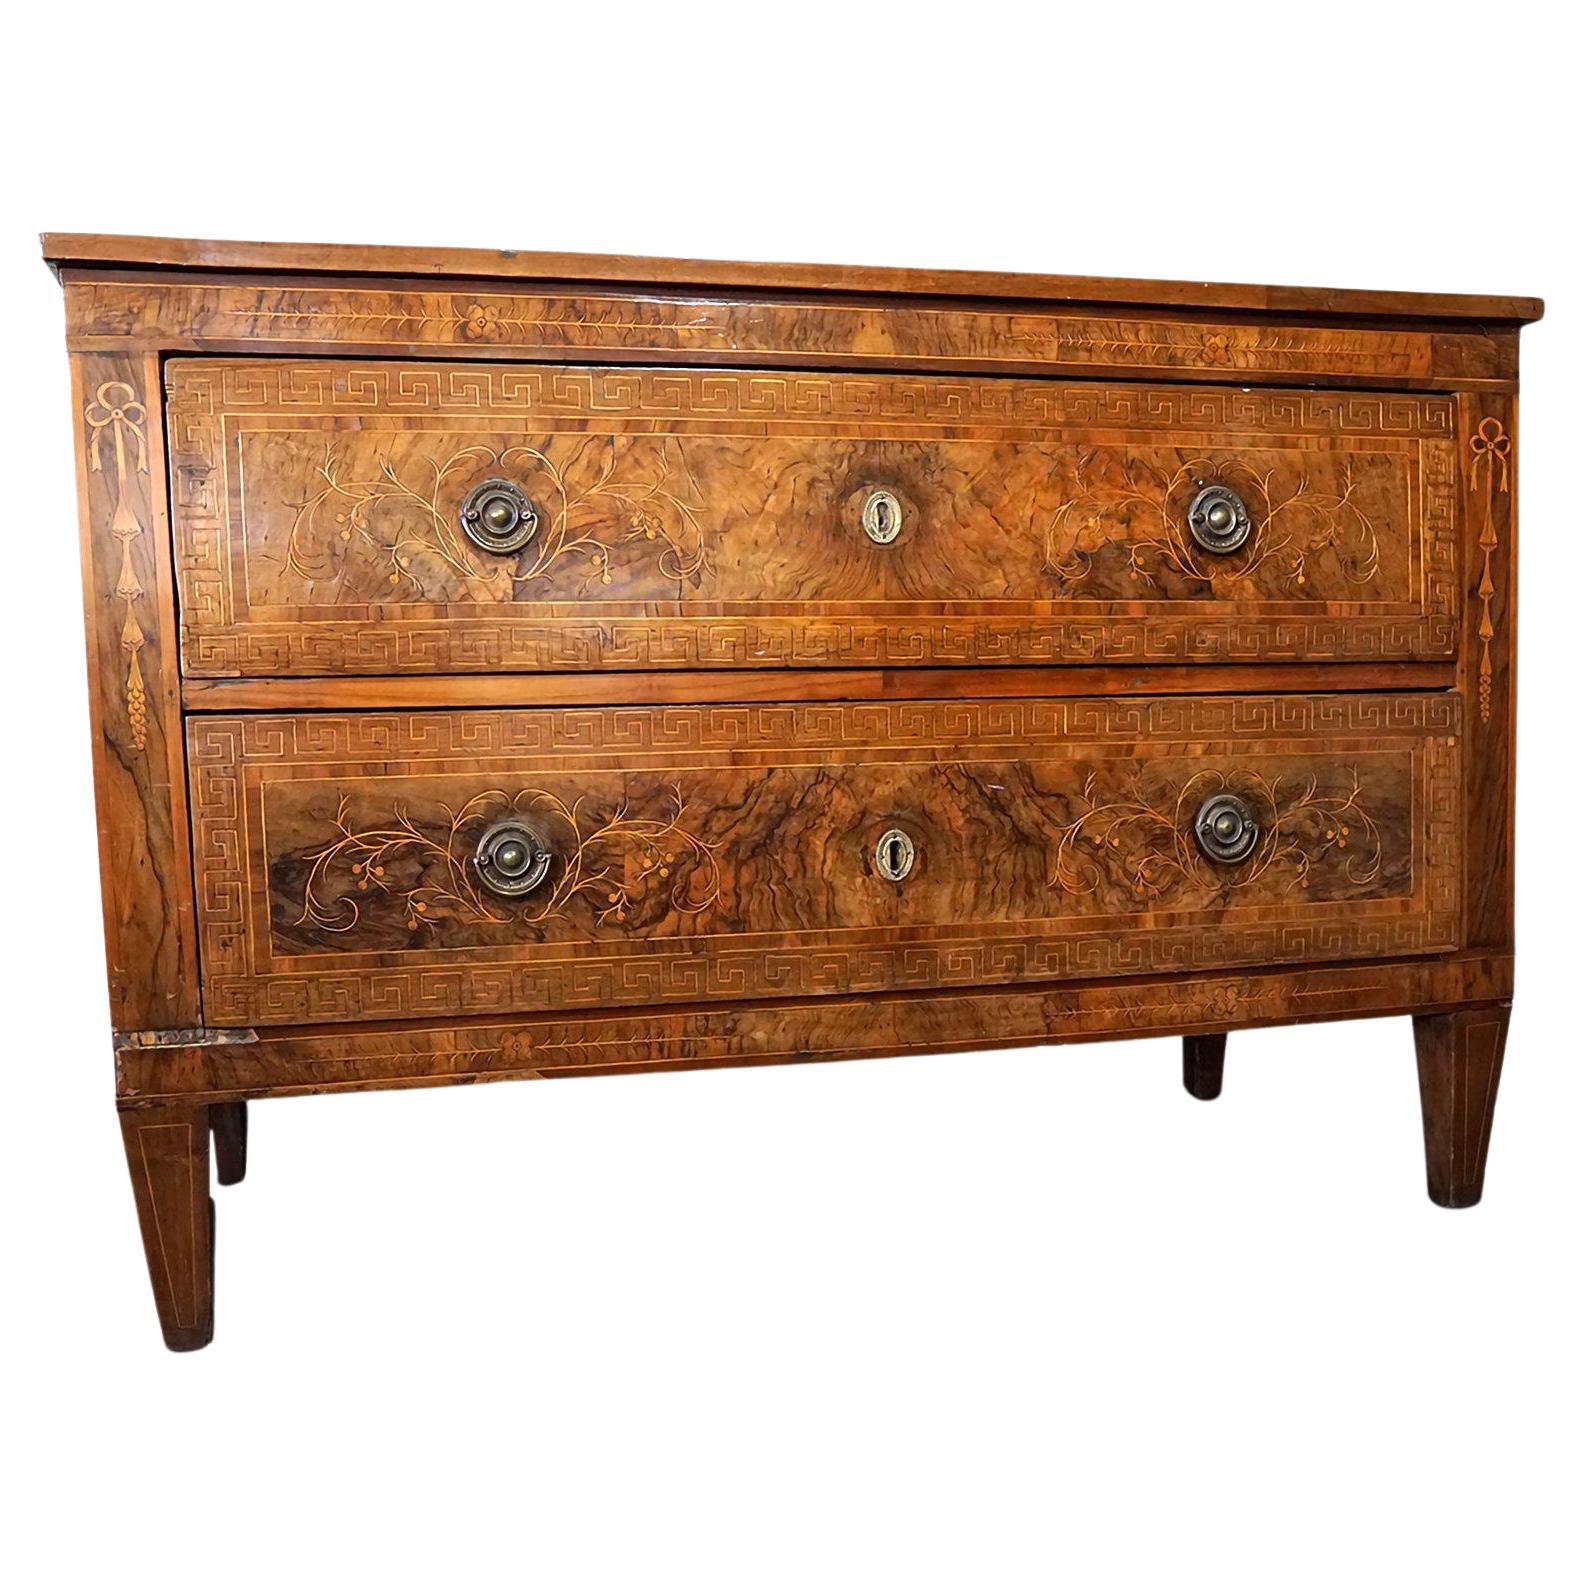 Louis XVI Chest of Drawers, with Inlaid